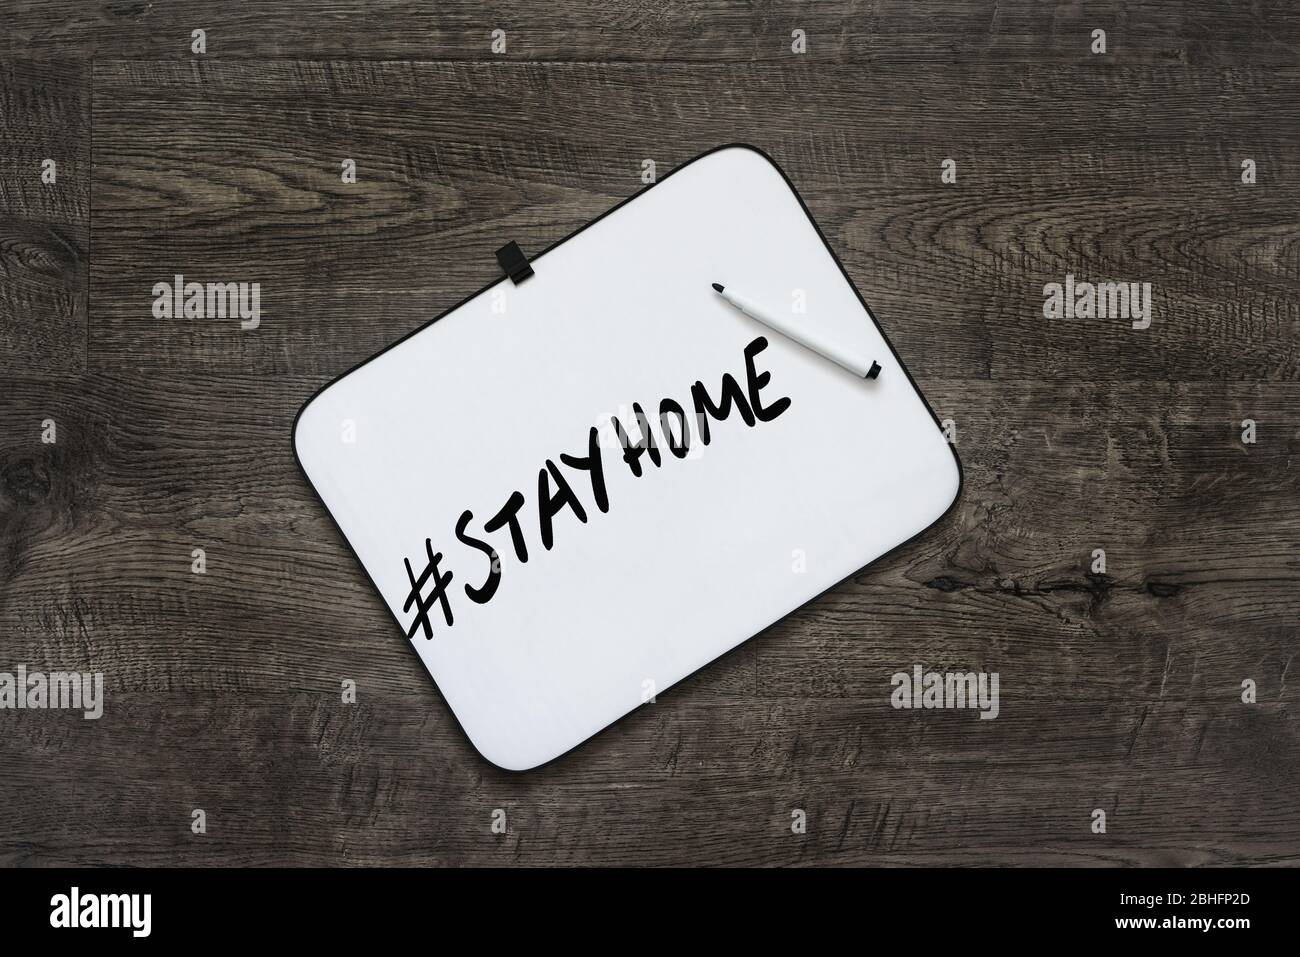 Hash Tag # Stay Home written on a white board due to Covid-19 pandemic, on a wooden background Stock Photo